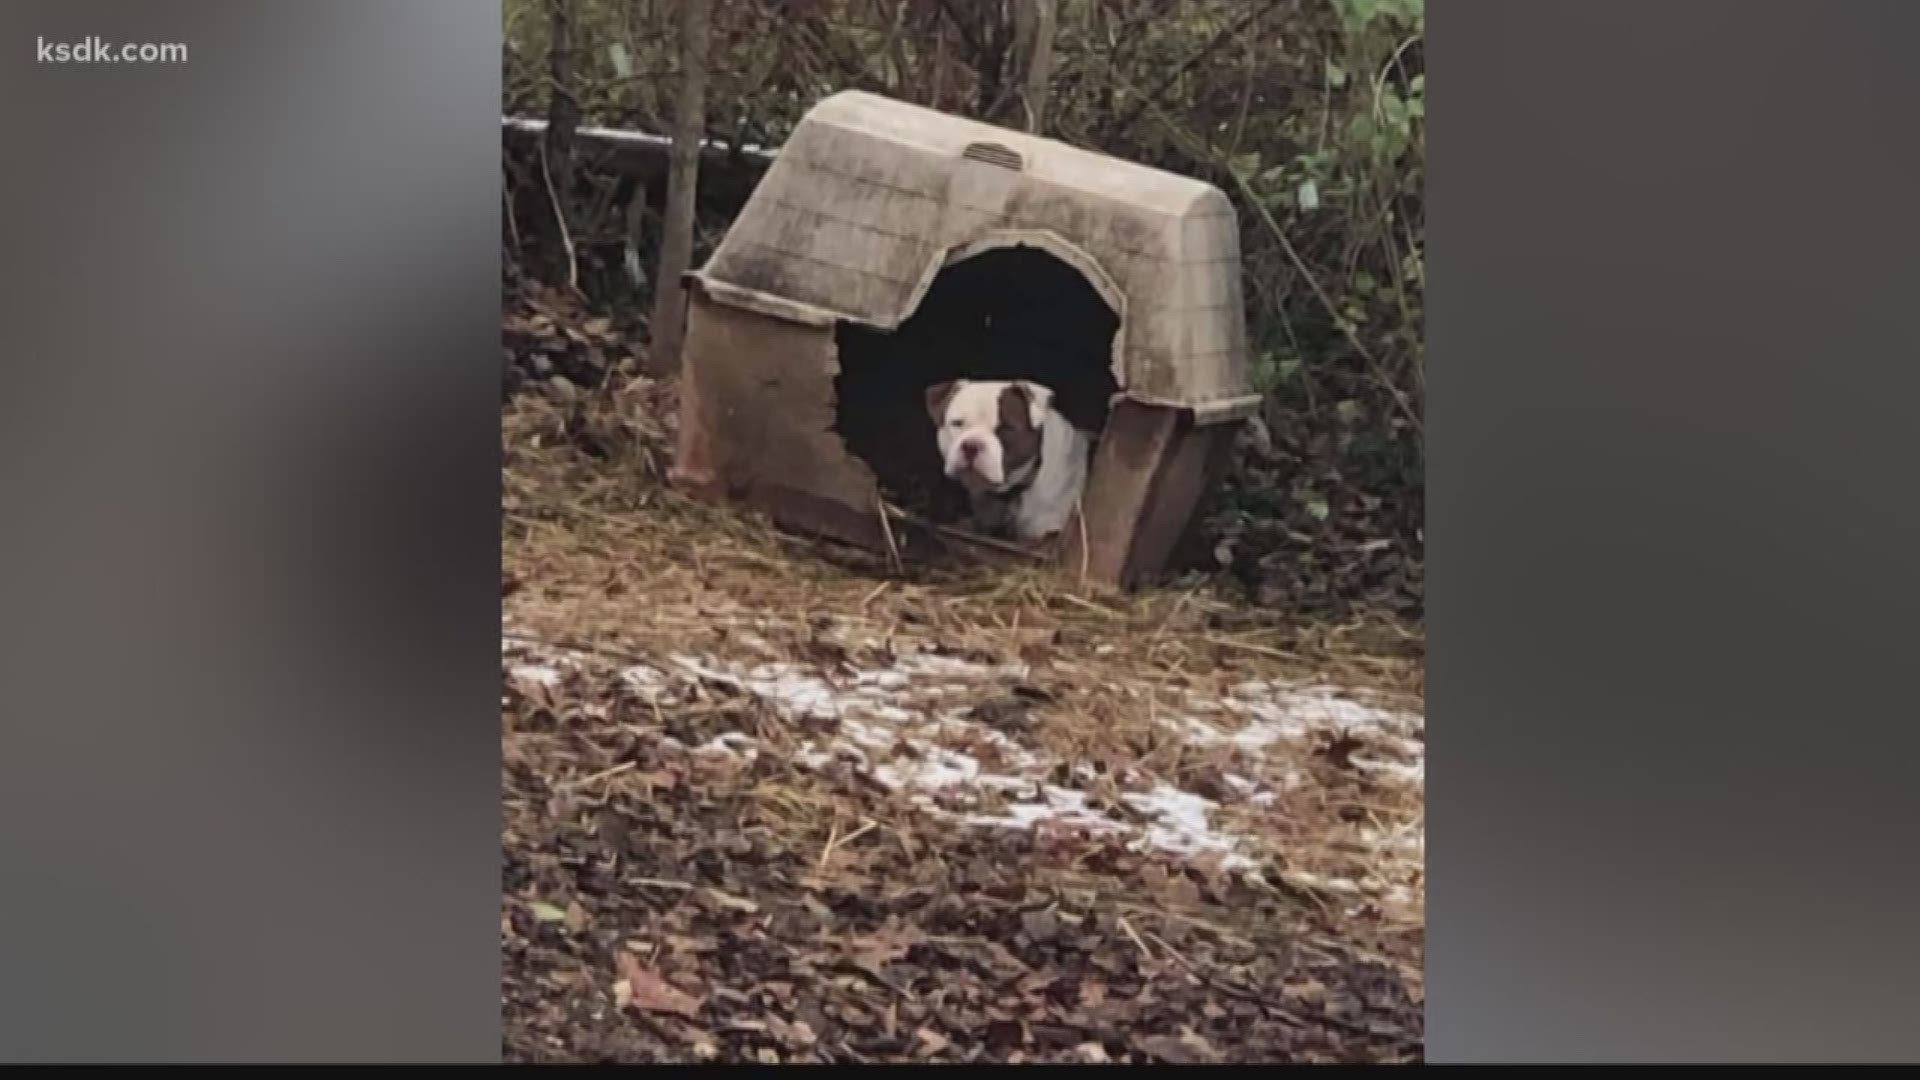 A resident who used to be an animal control officer says dogs throughout the county are being left unattended as wind chills drop into the negatives.